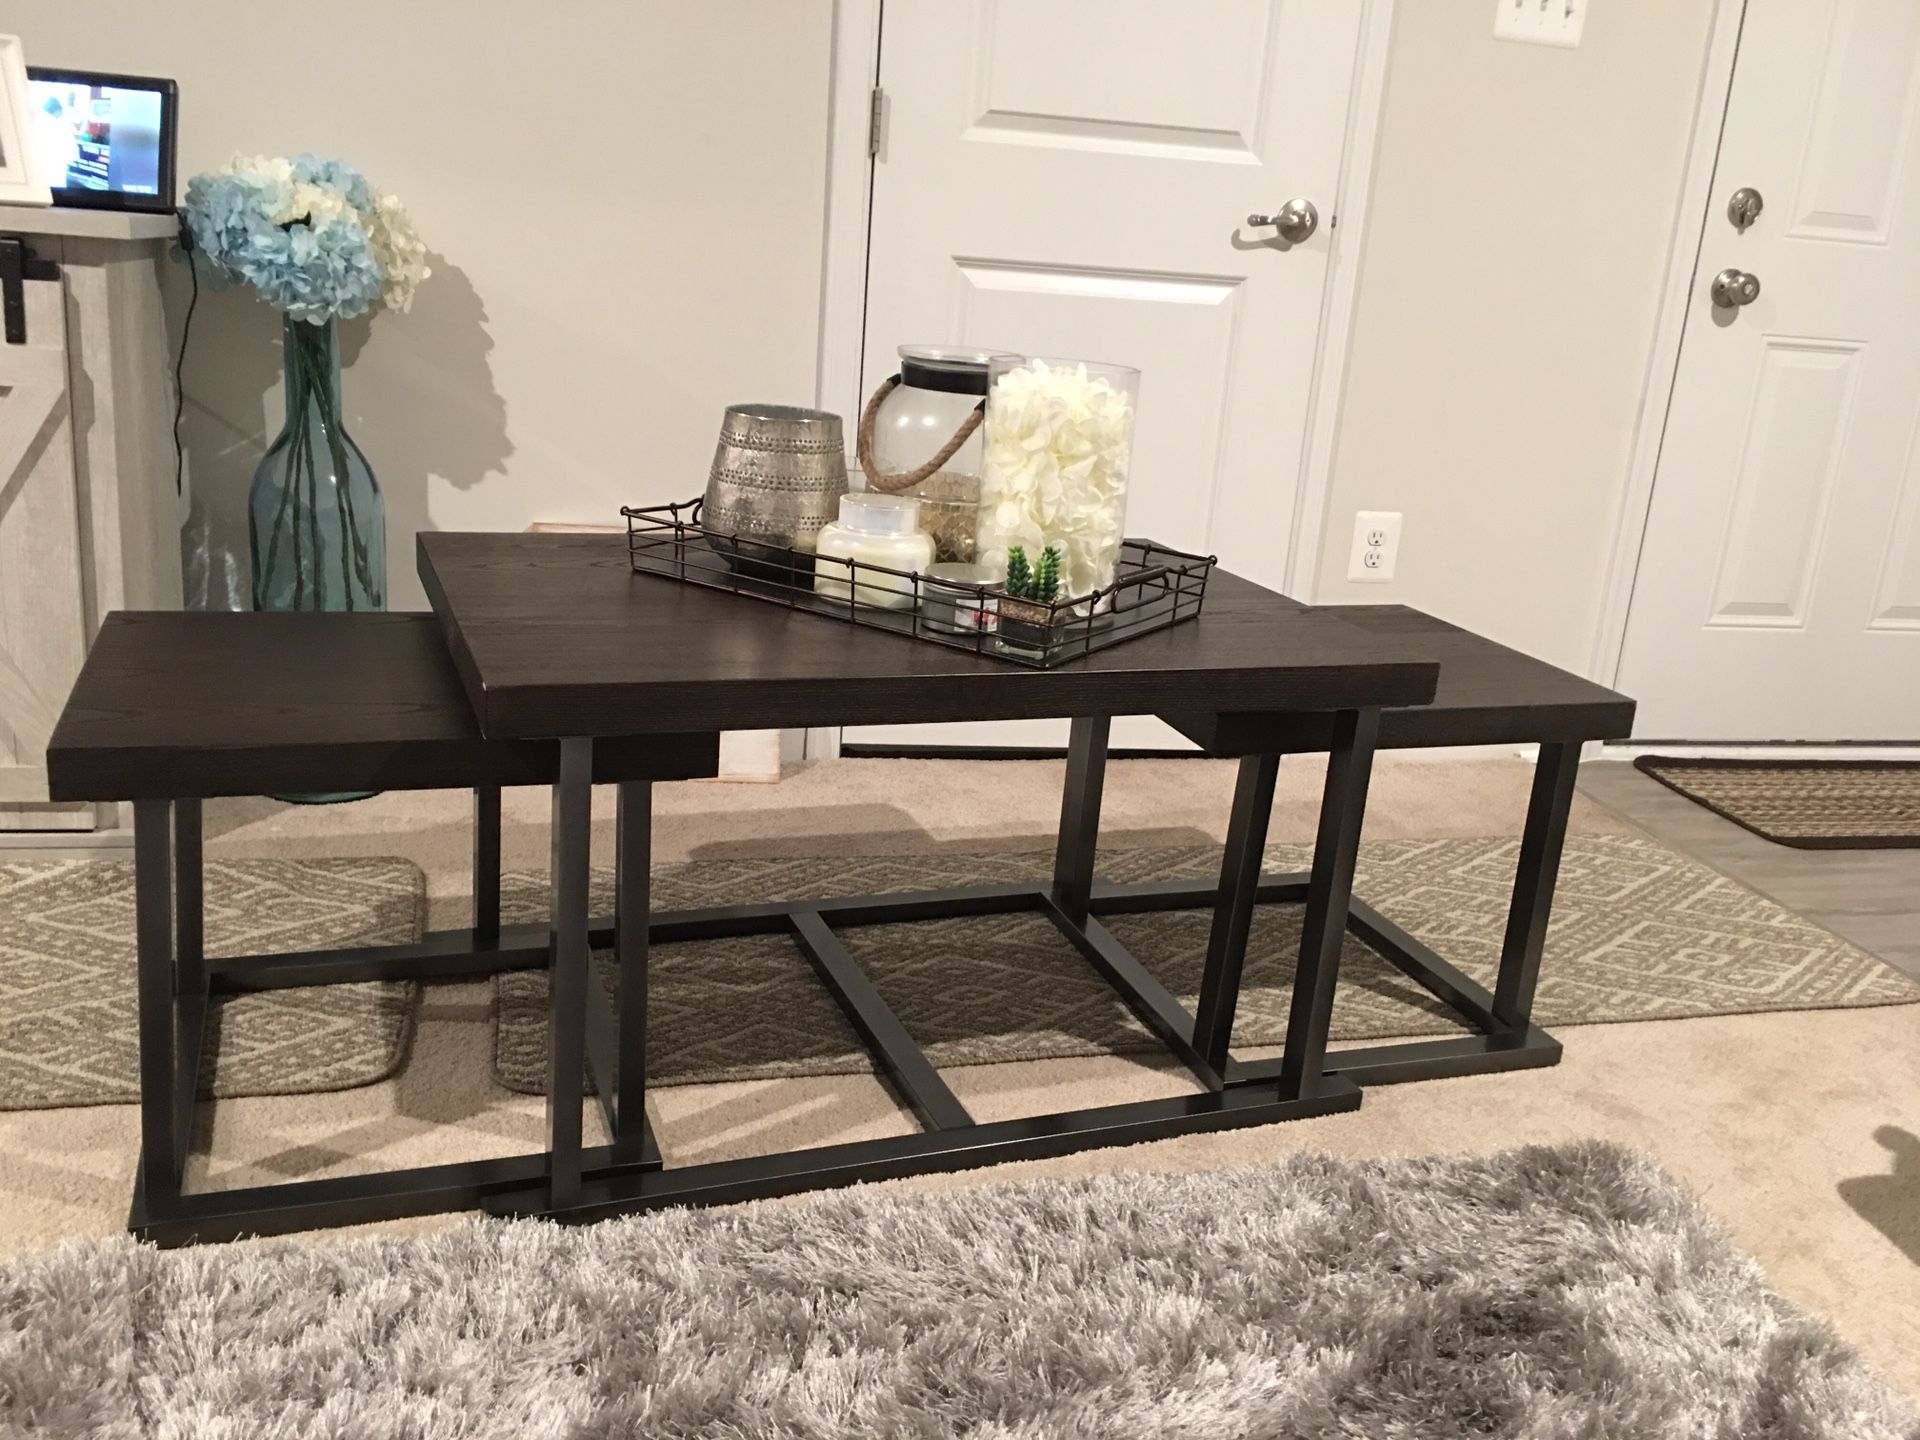 Center table new /barely used.